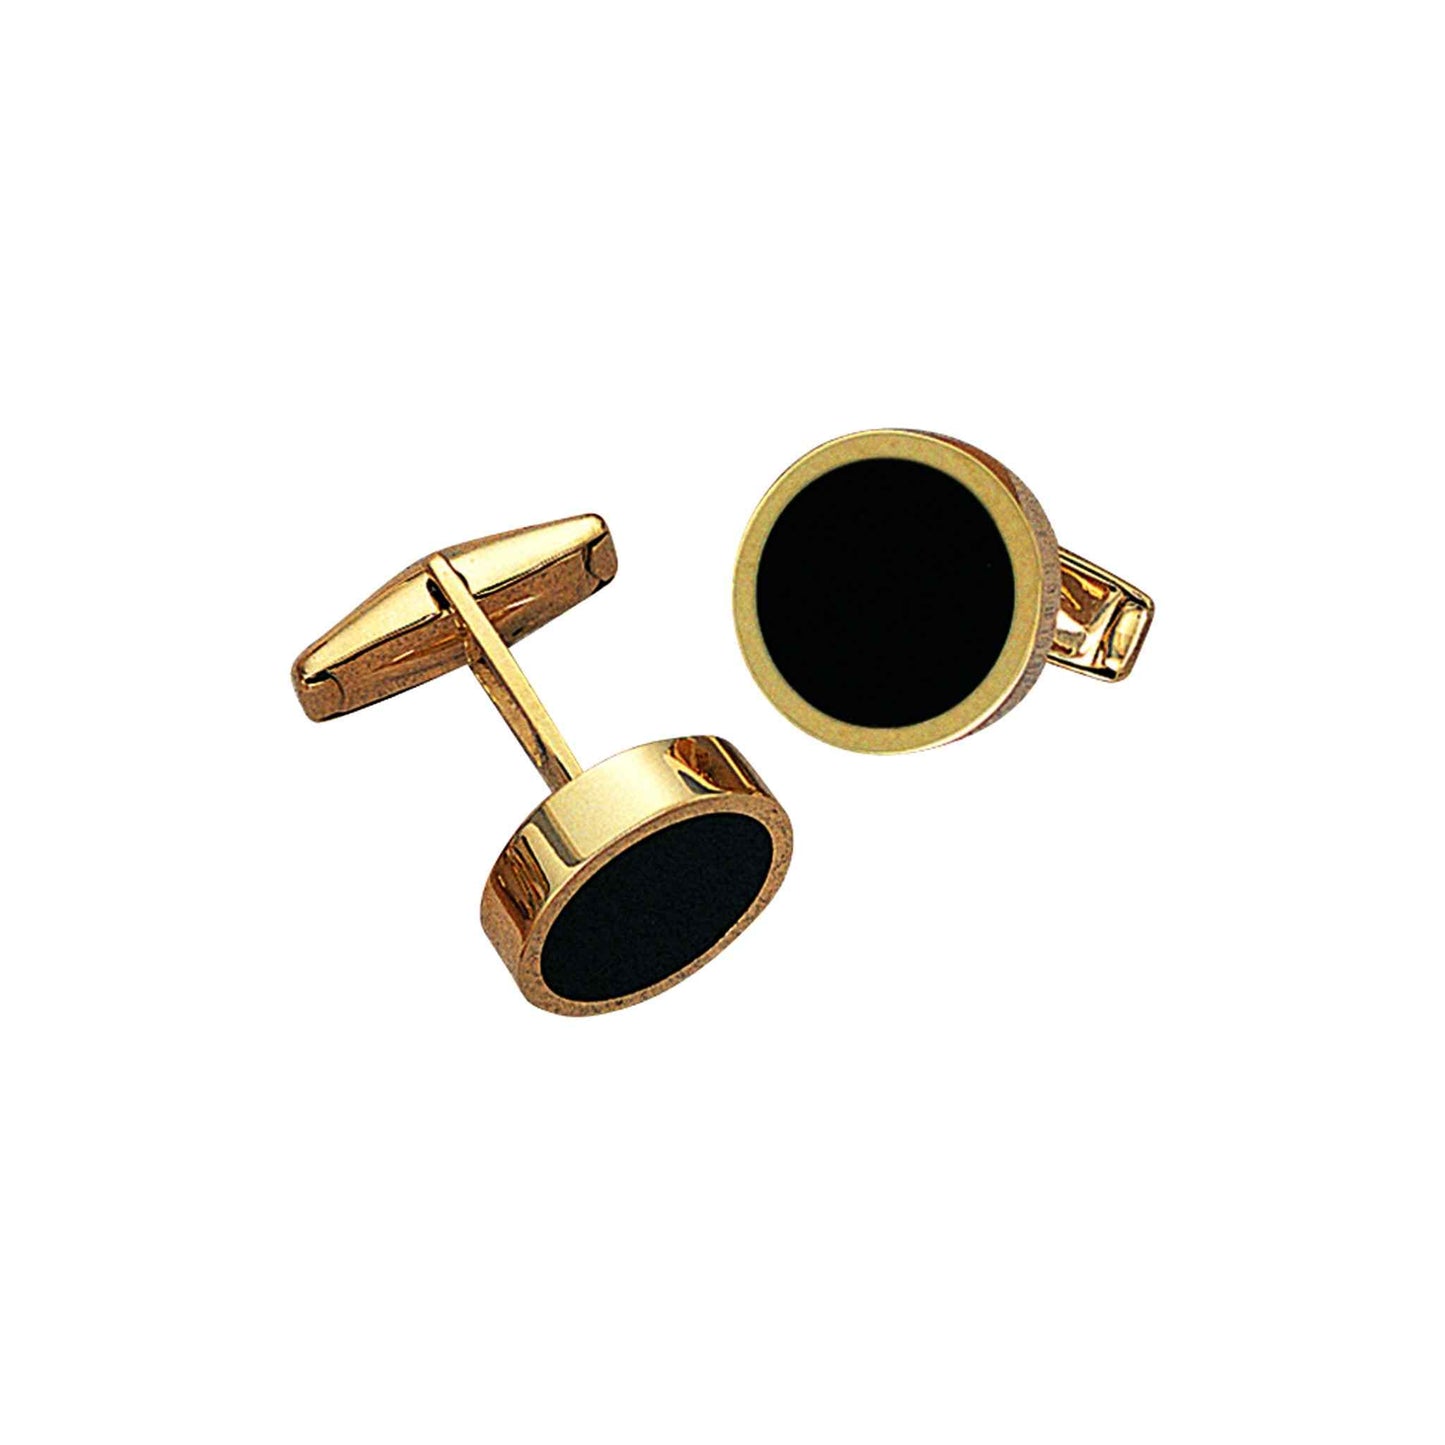 A 14k yellow gold round onyx inlay cufflinks displayed on a neutral white background.